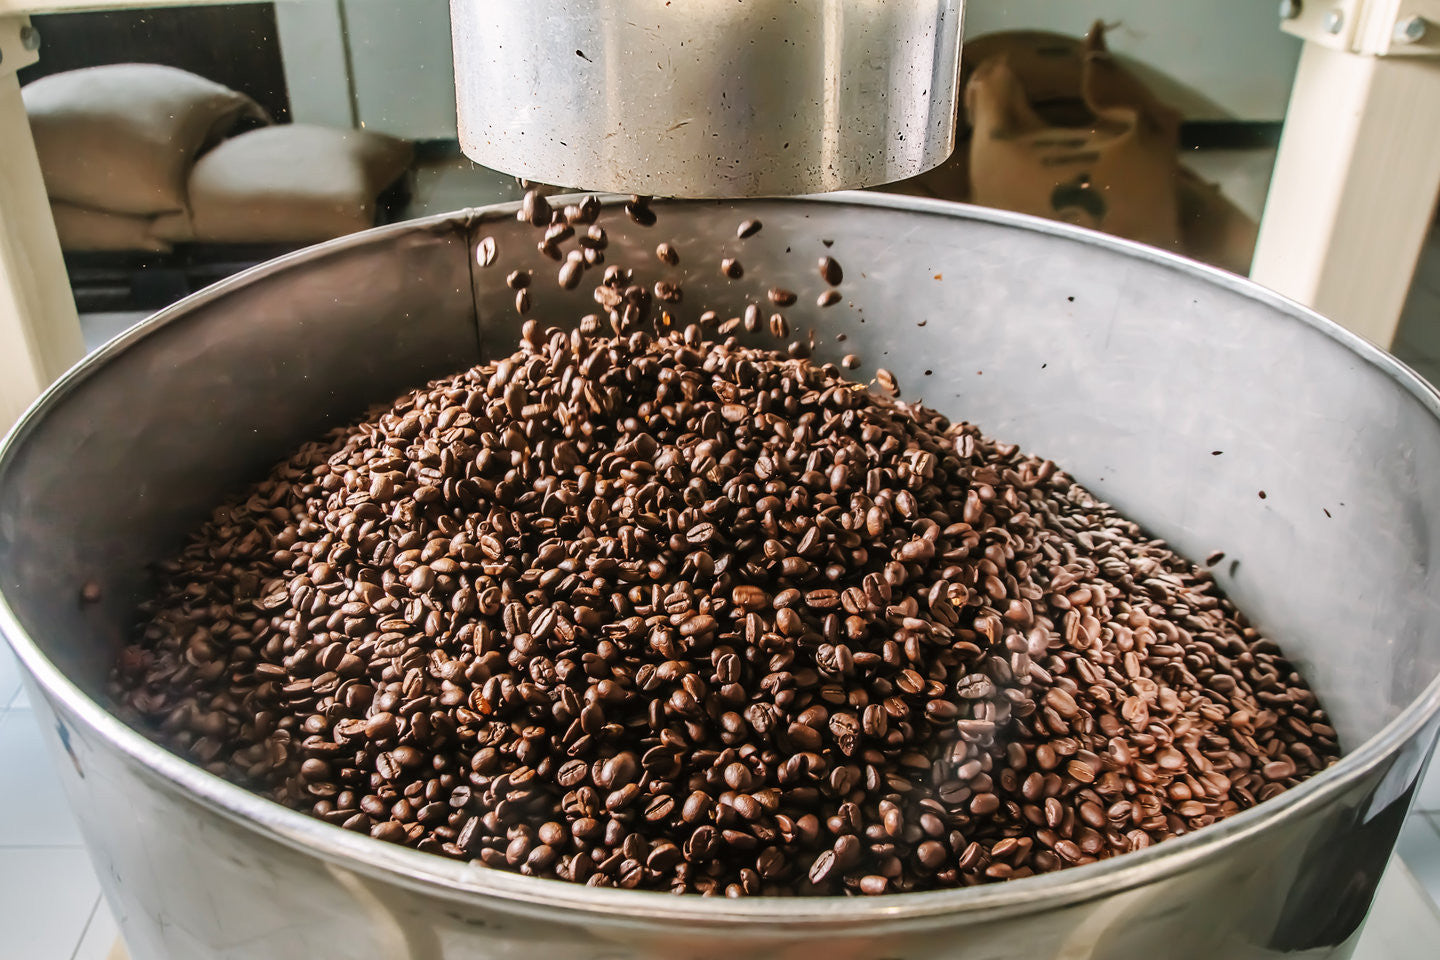 What’s the difference between single origin coffee beans and coffee blends?